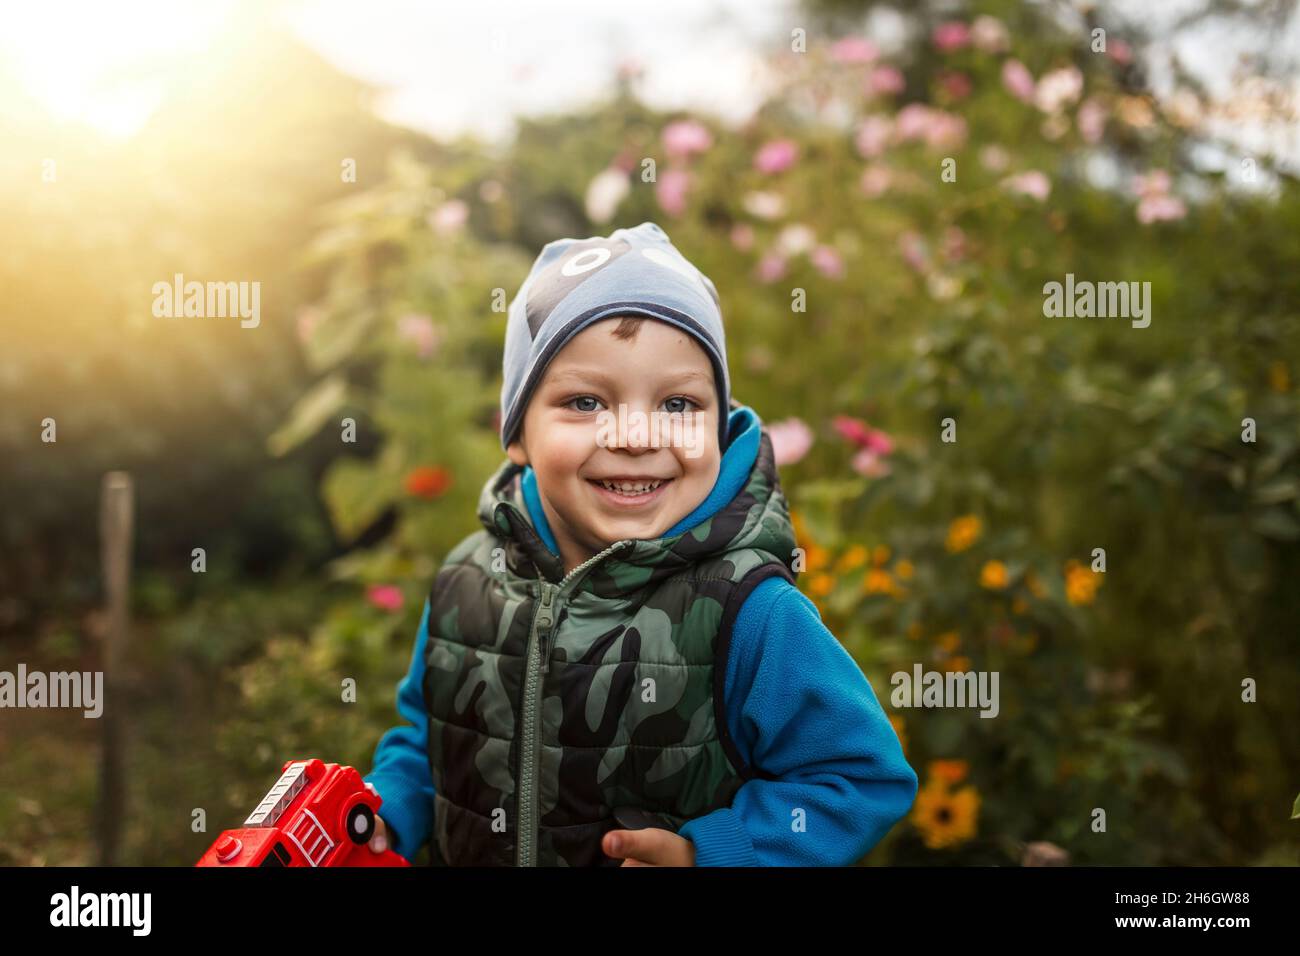 Toddler boy smiling in garden full of flowers wearing blue clothes Stock Photo